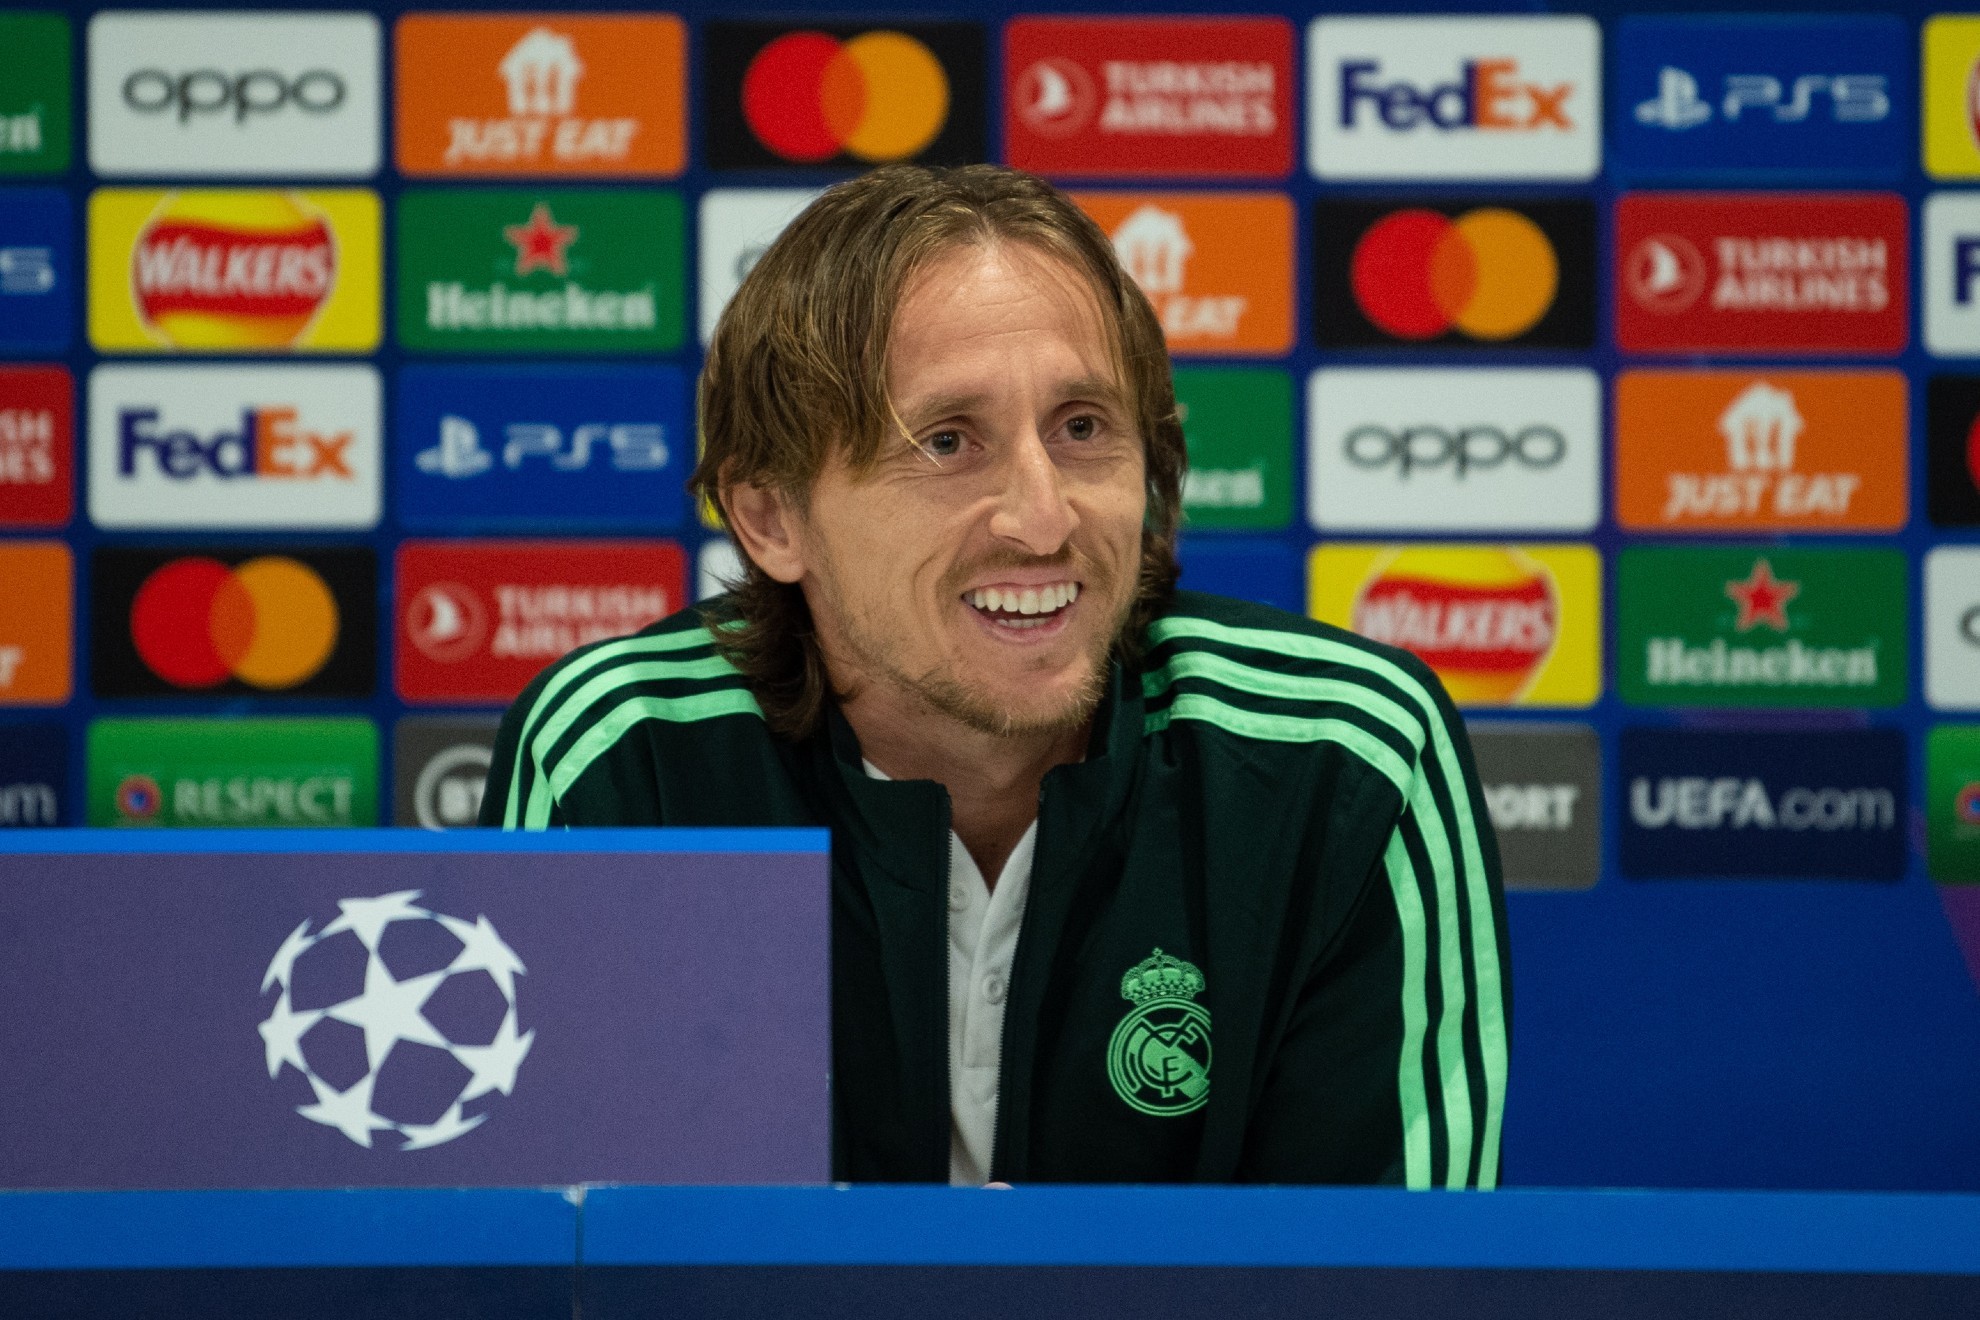 Modric: I want to continue because I deserve it, not because they give it to me